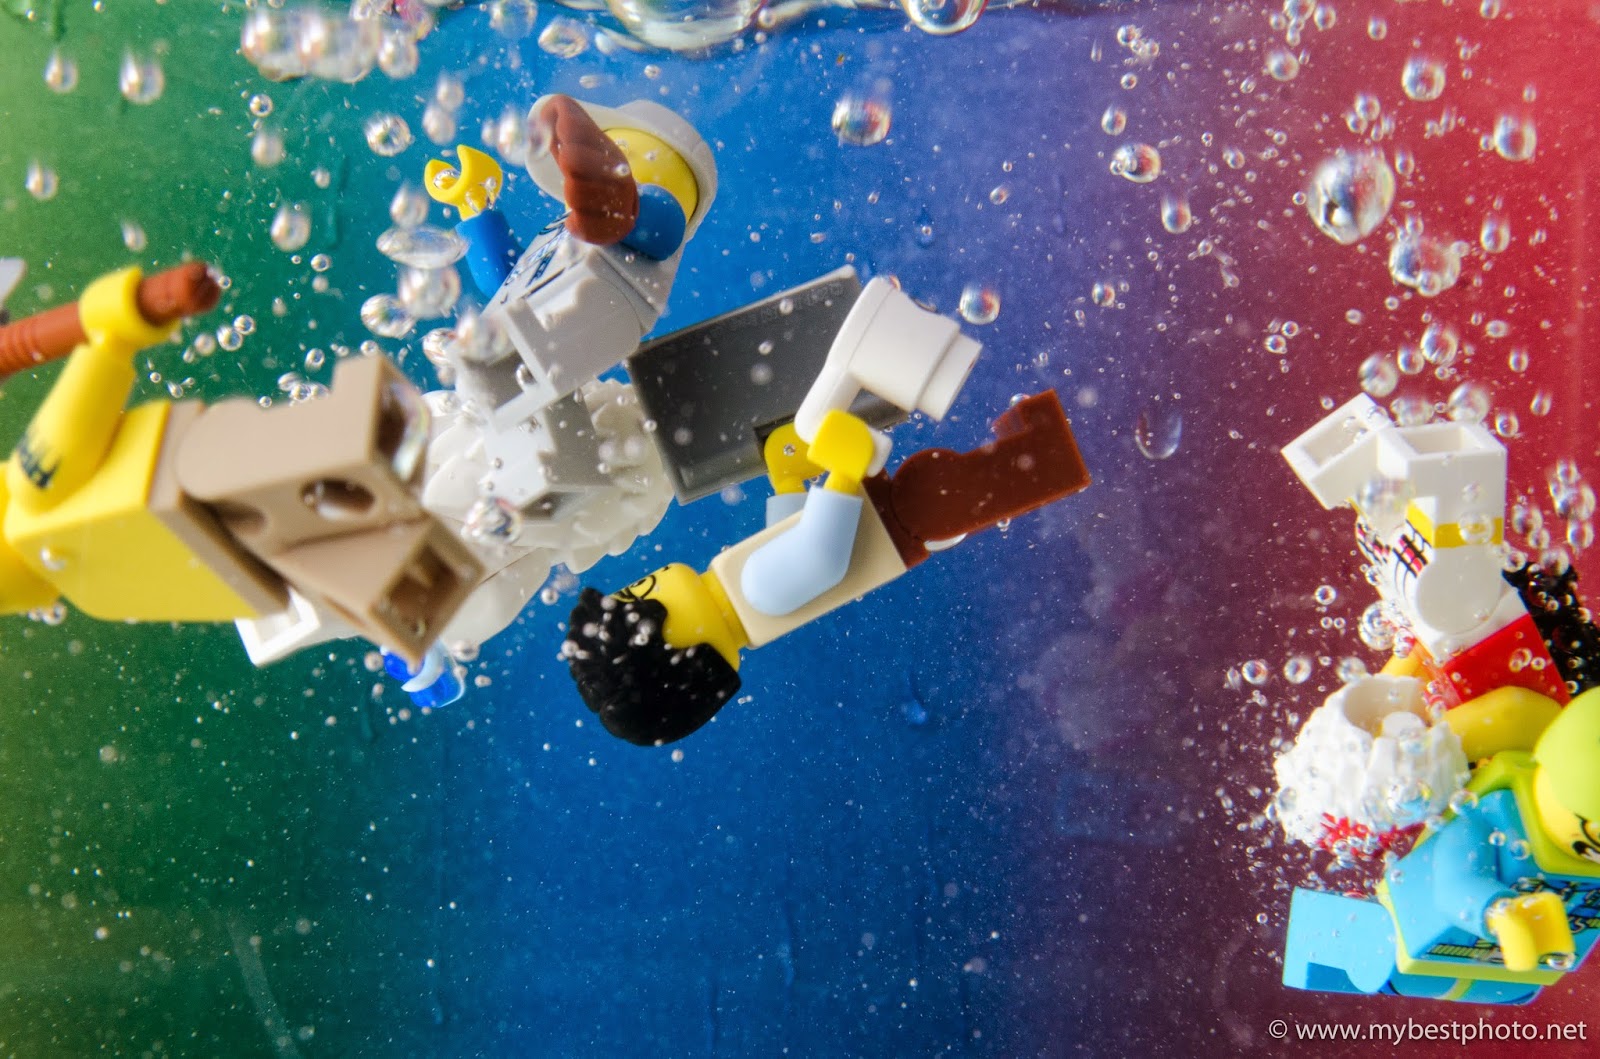 Lego Minifigures In The Wild Minifigure Pool Party Wallpaper